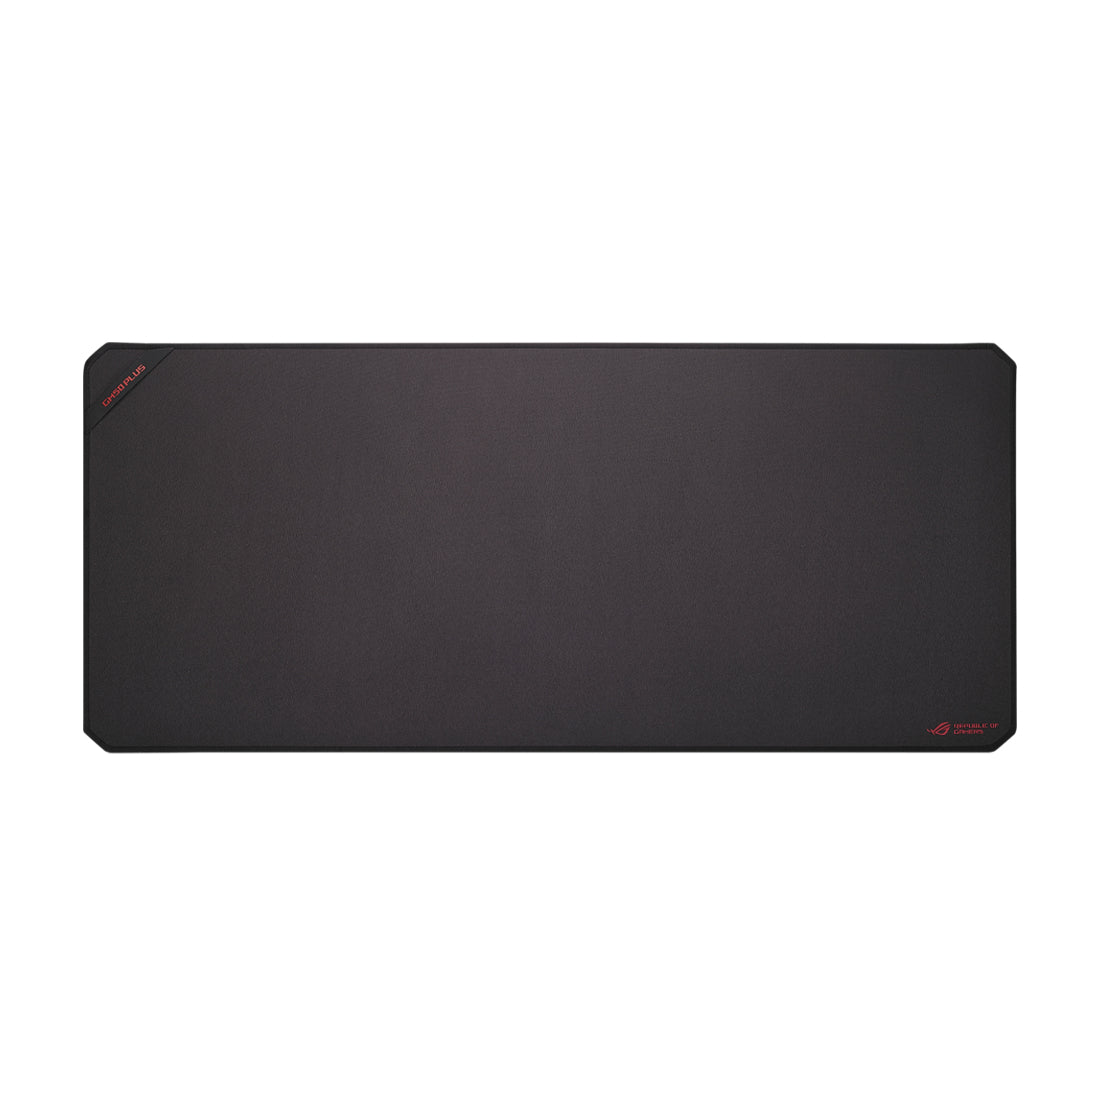 ASUS ROG GM50 Plus Extra Large Gaming Mouse Pad with Non-slip Rubber Base